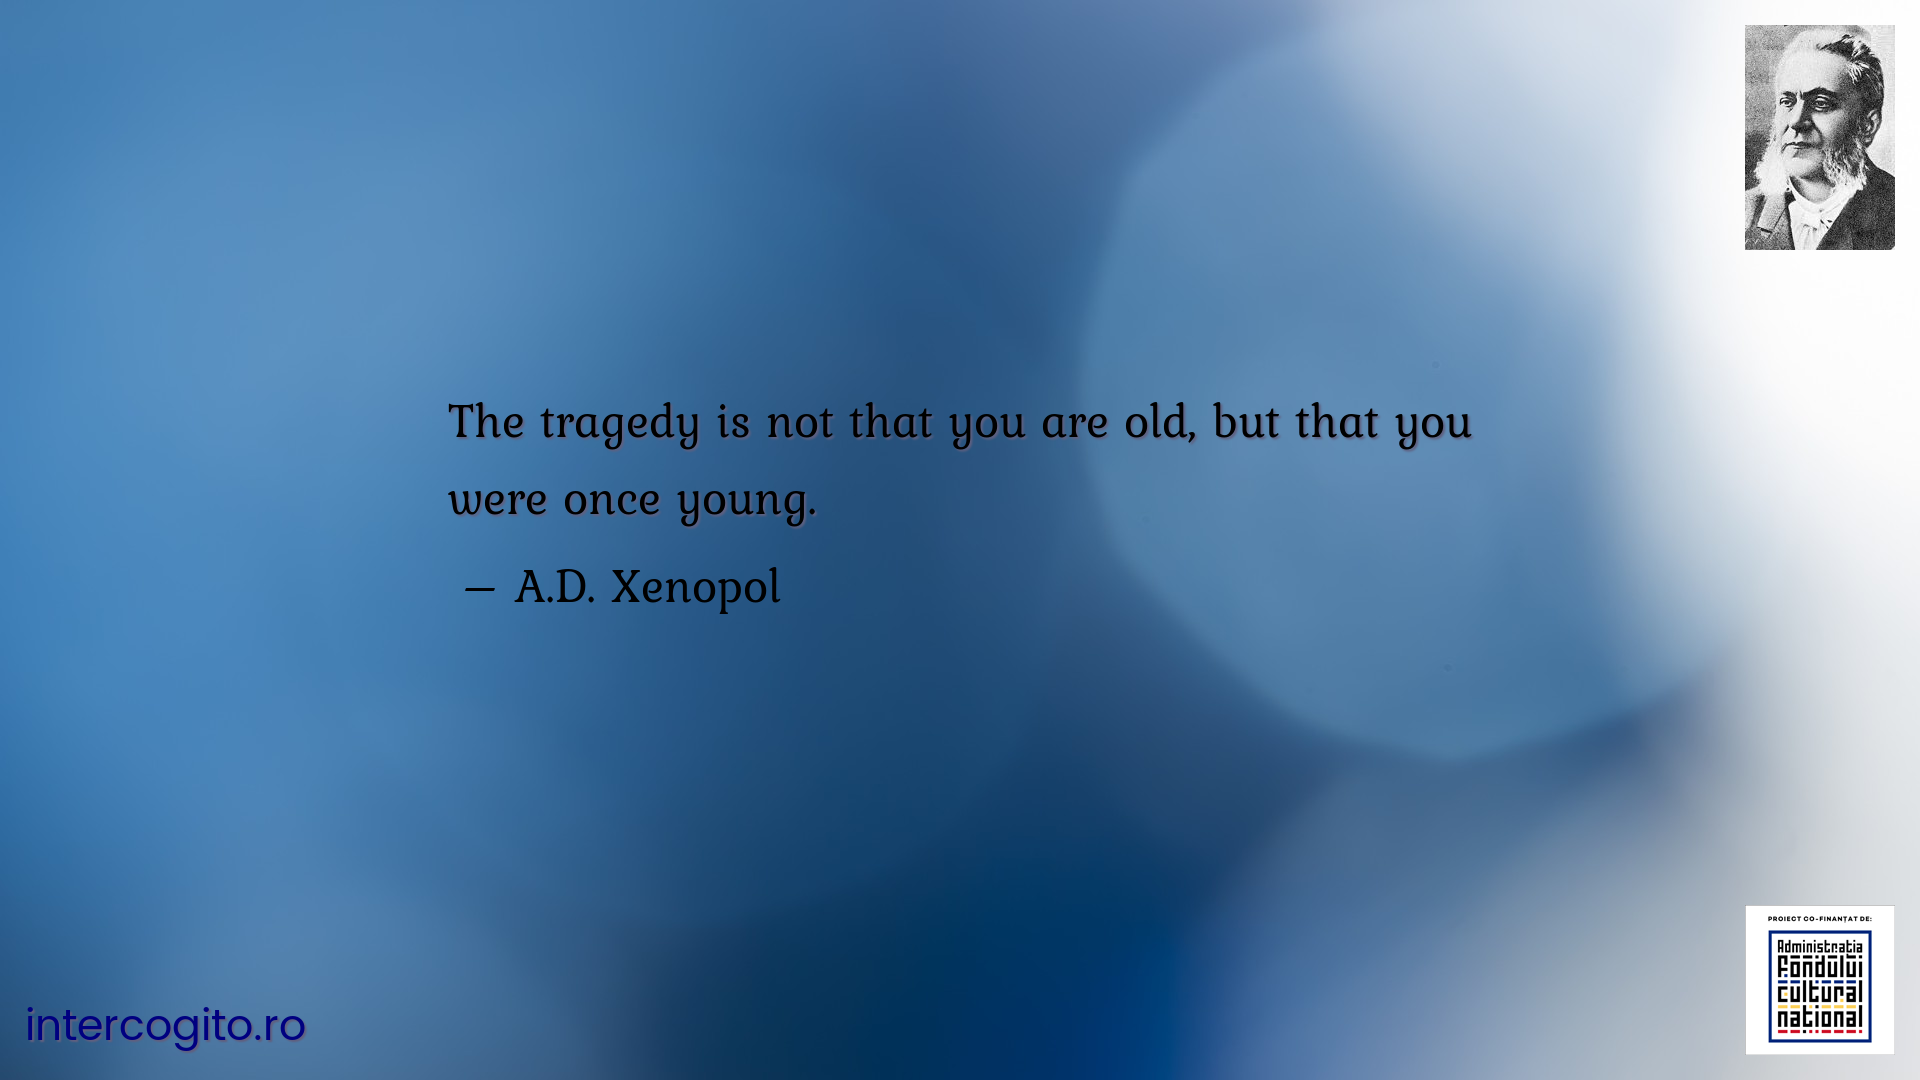 The tragedy is not that you are old, but that you were once young.